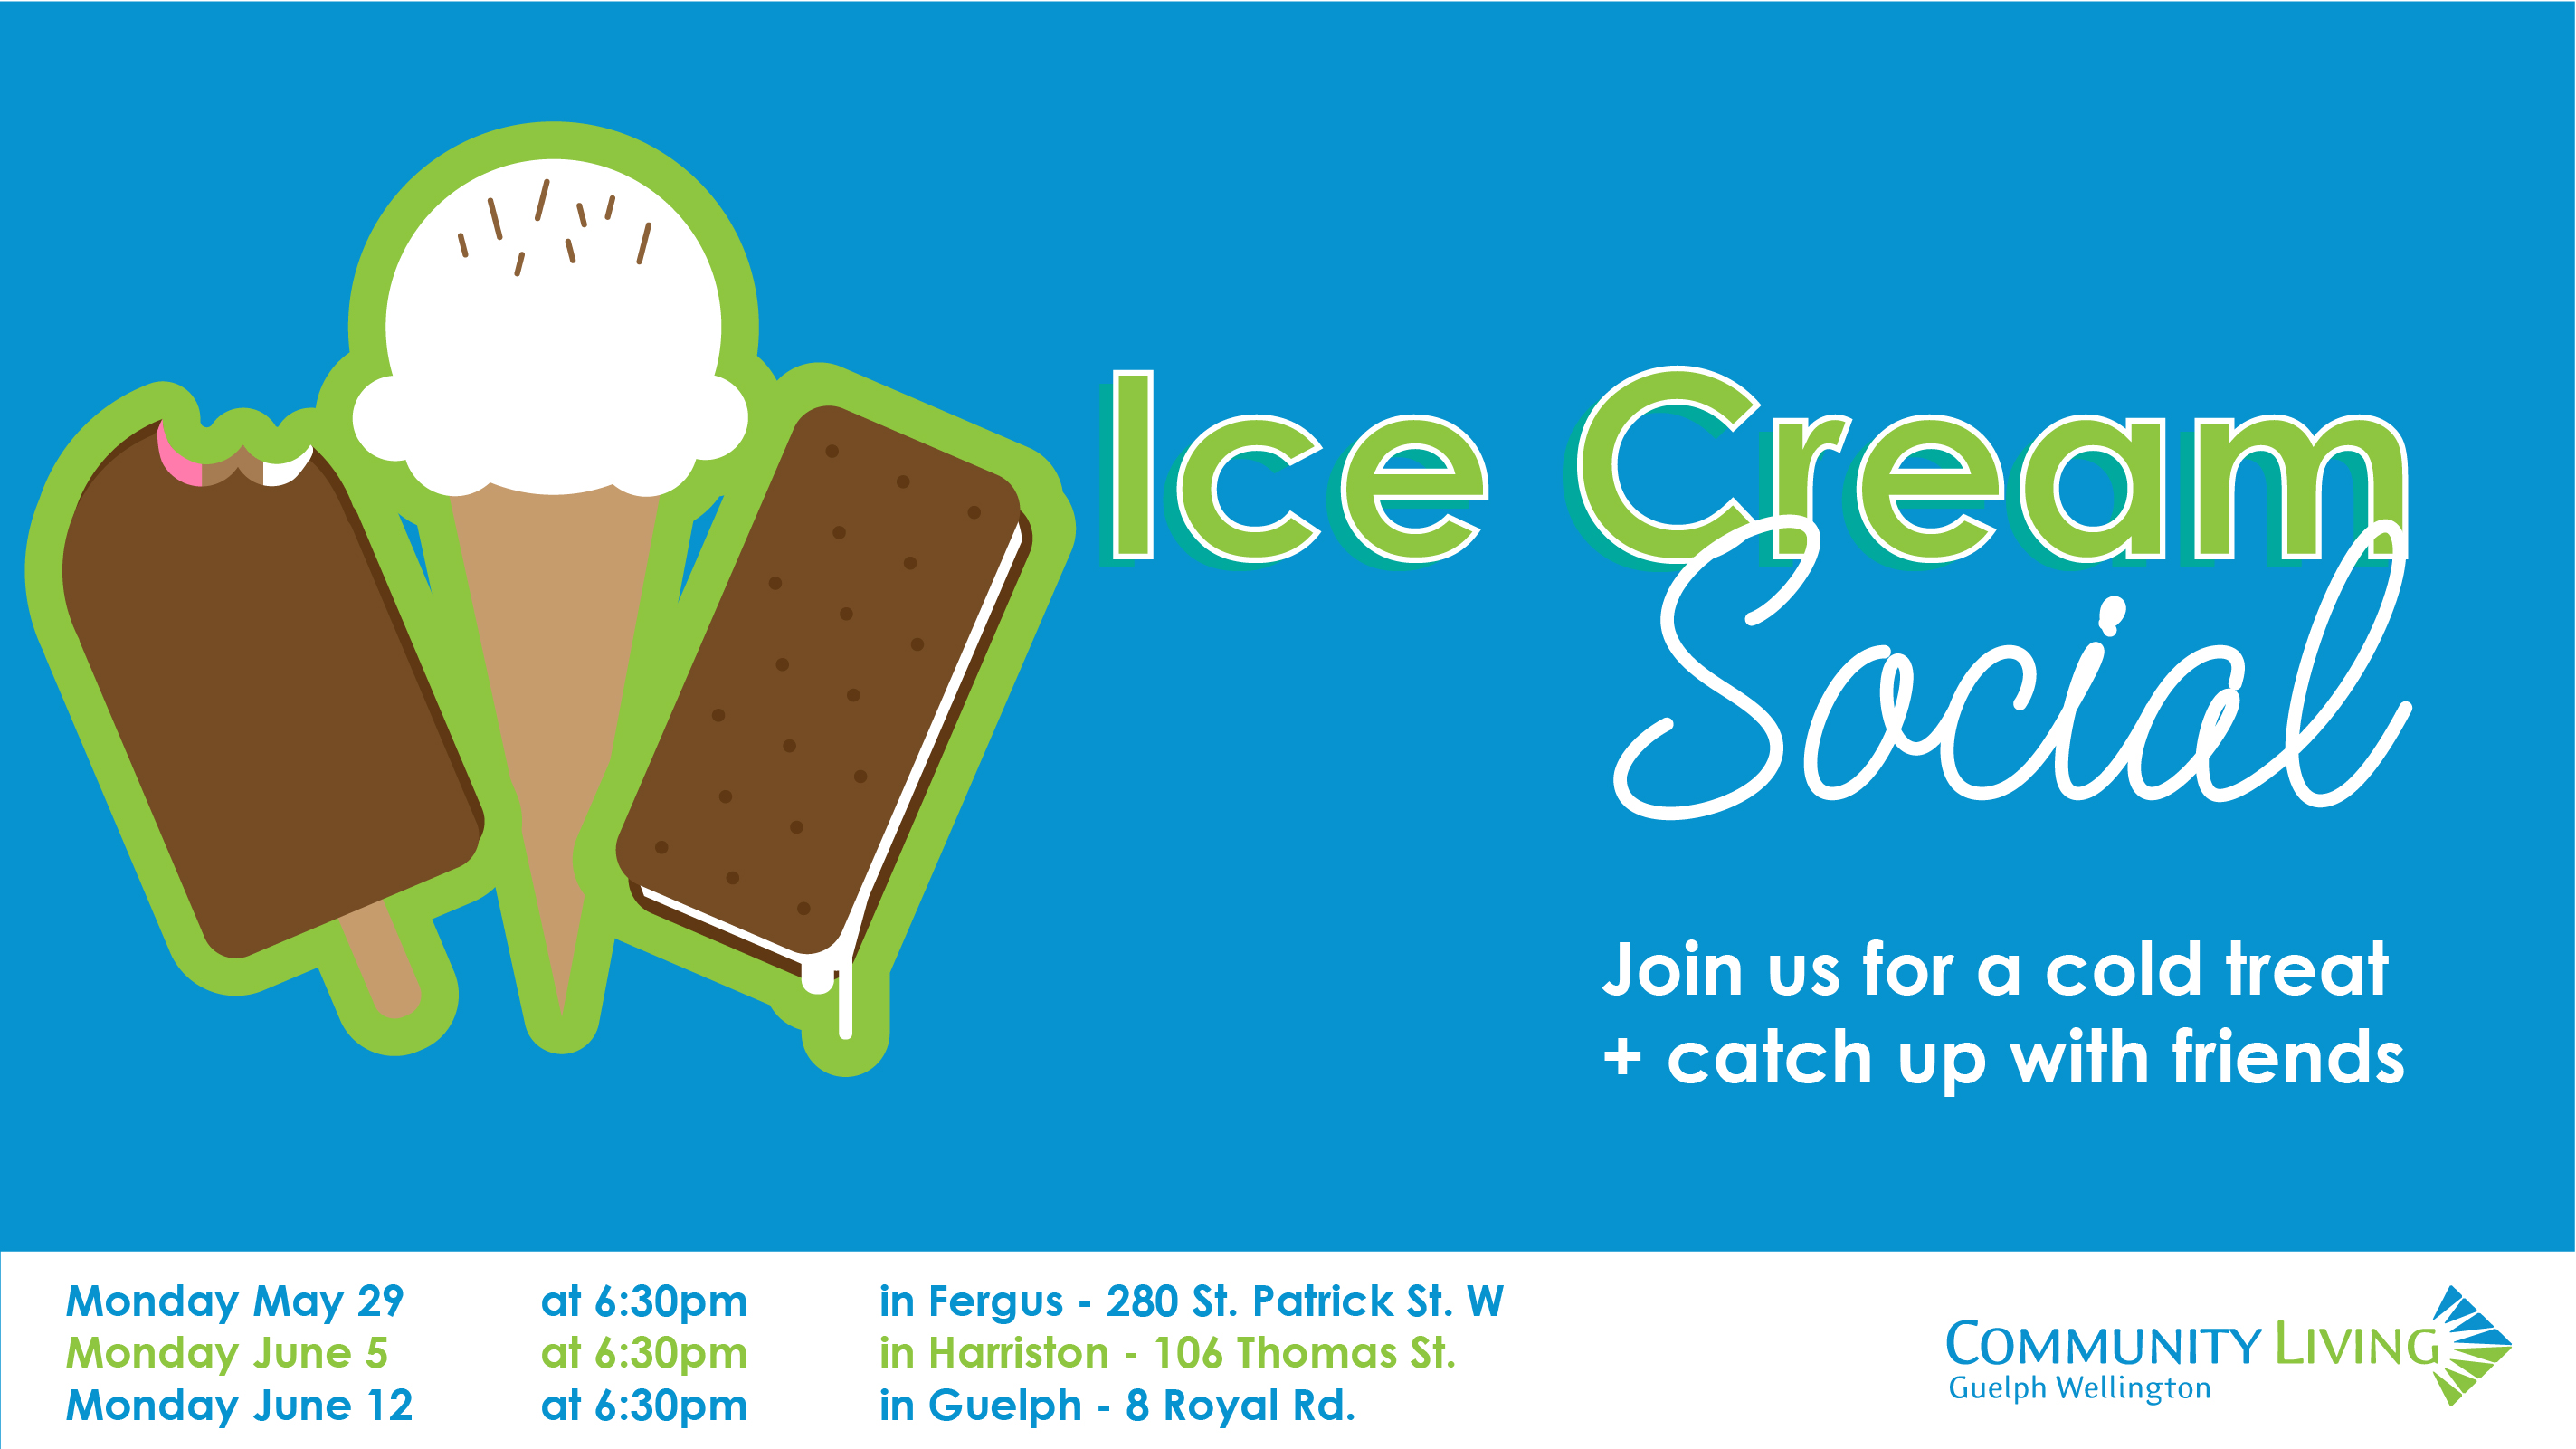 ice cream social, clgw, community living guelph wellington, people with disabilities